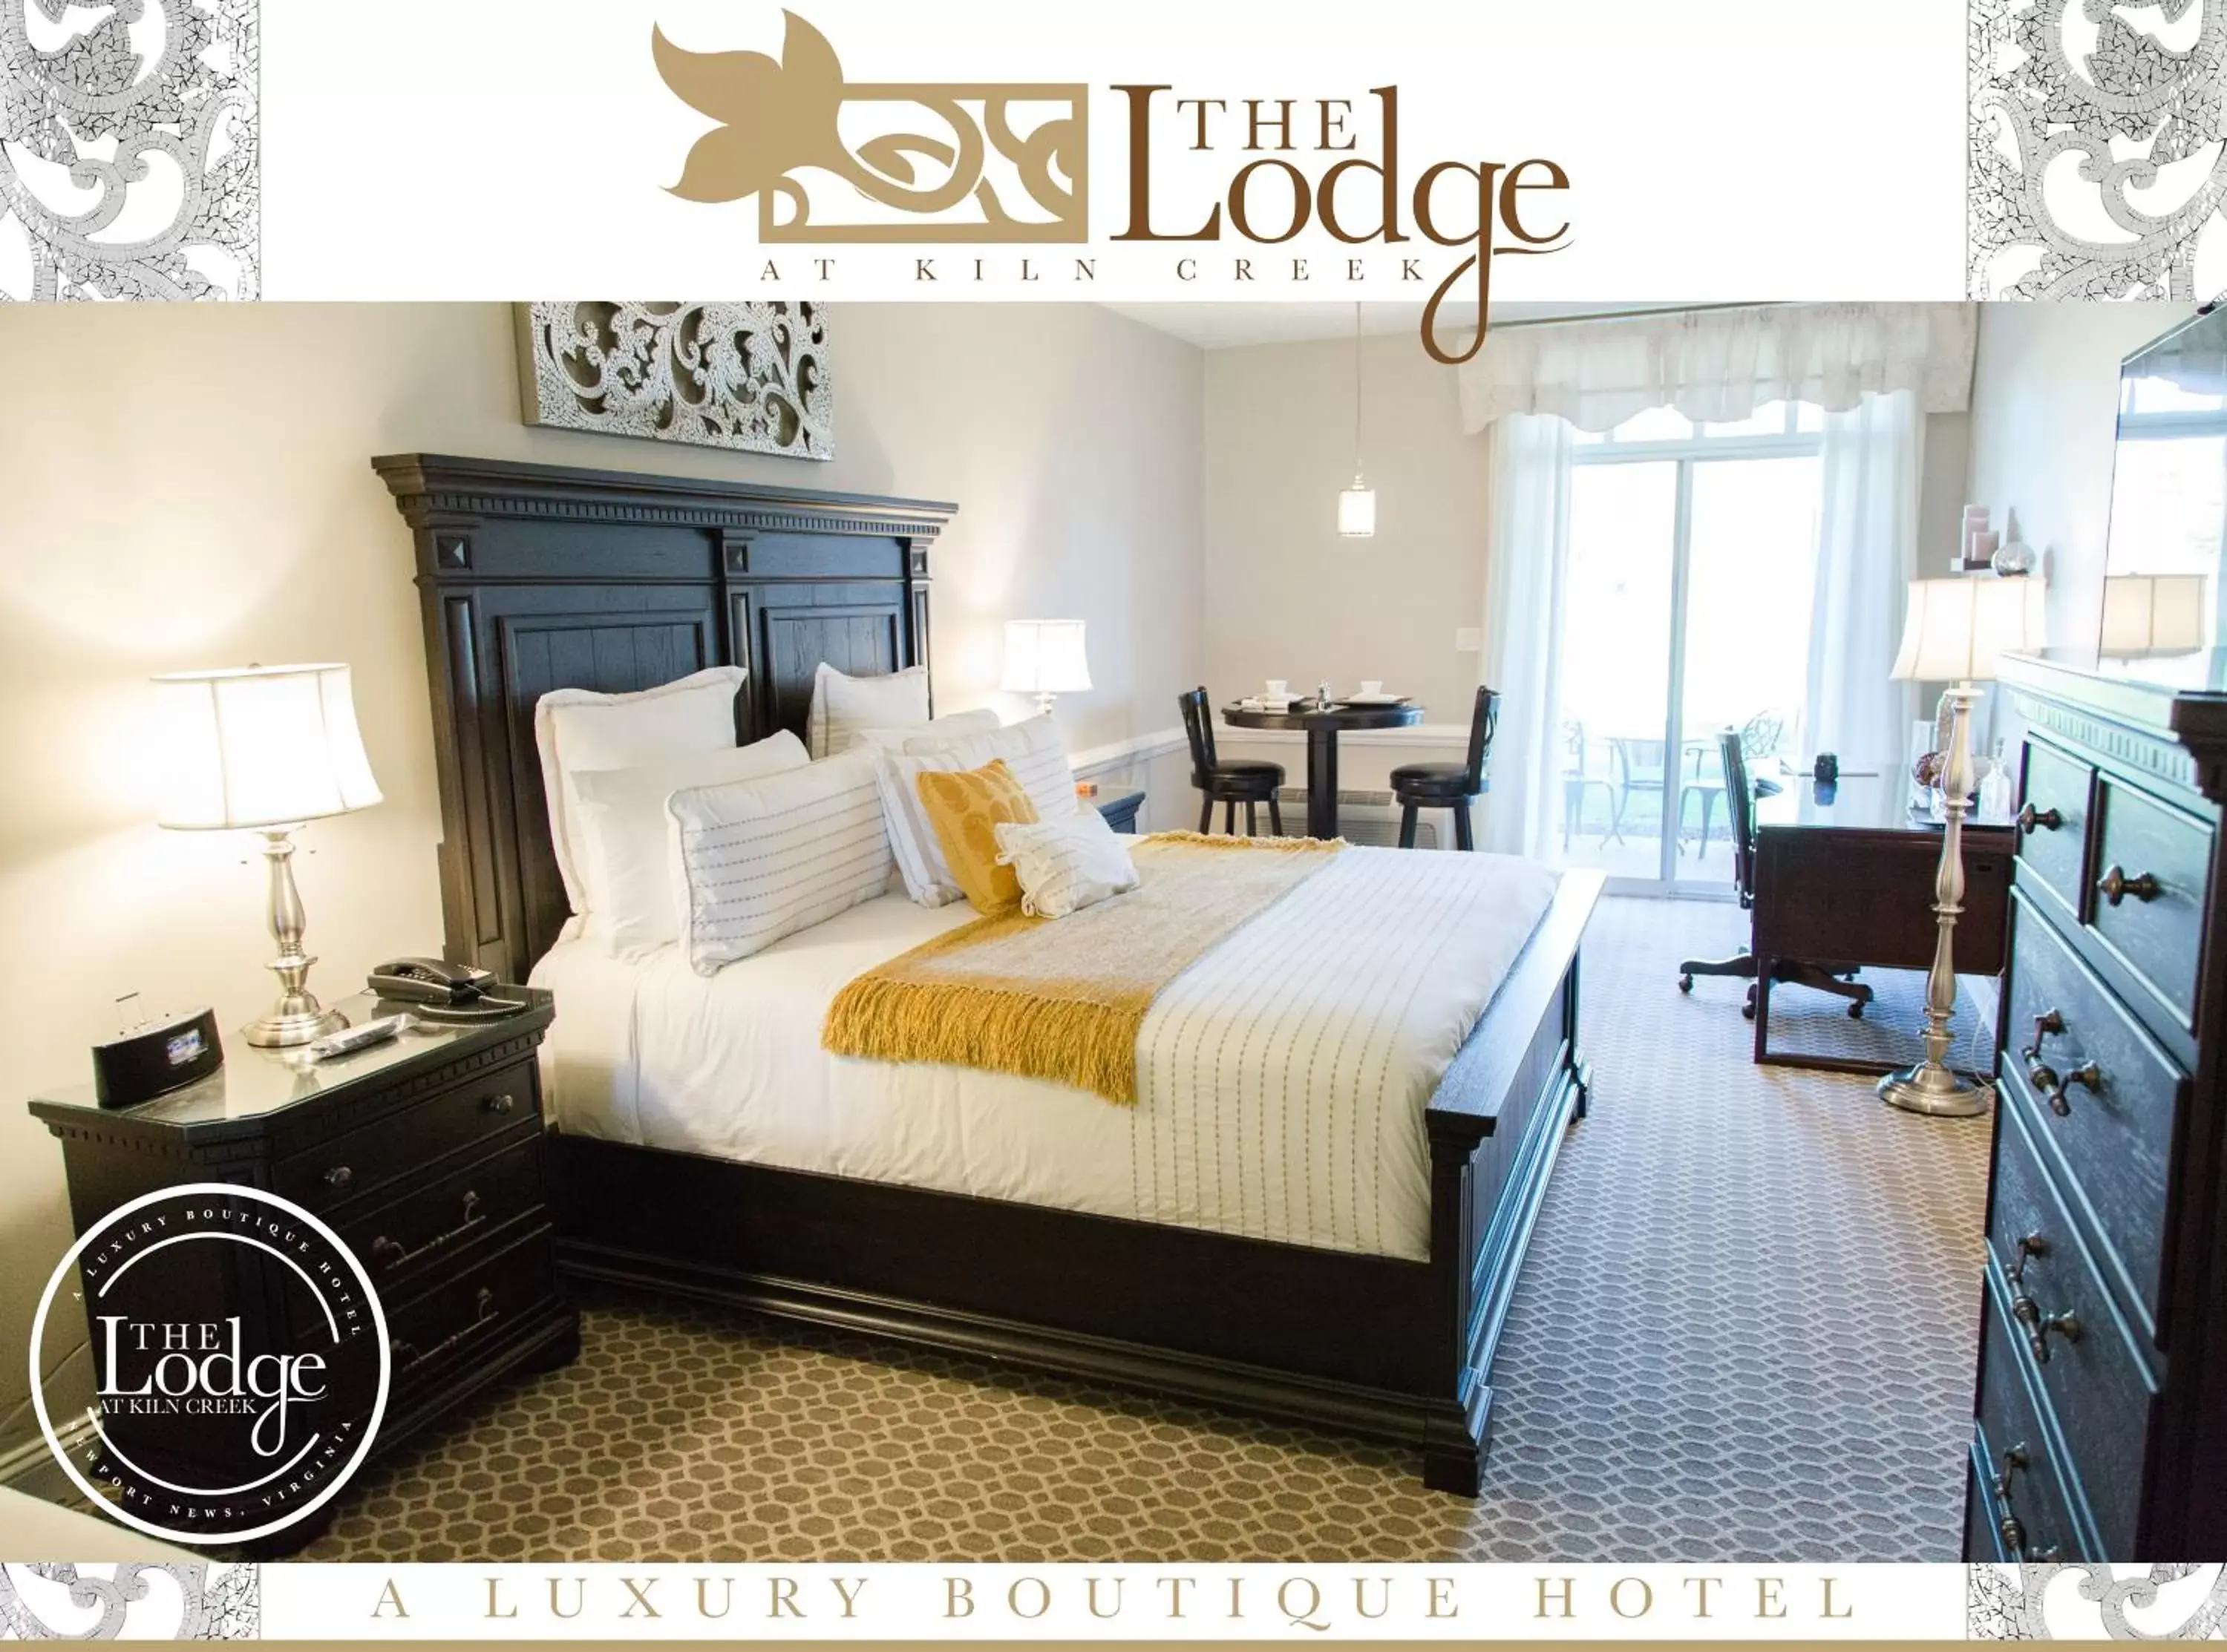 Property logo or sign, Bed in The Lodge at Kiln Creek Resort